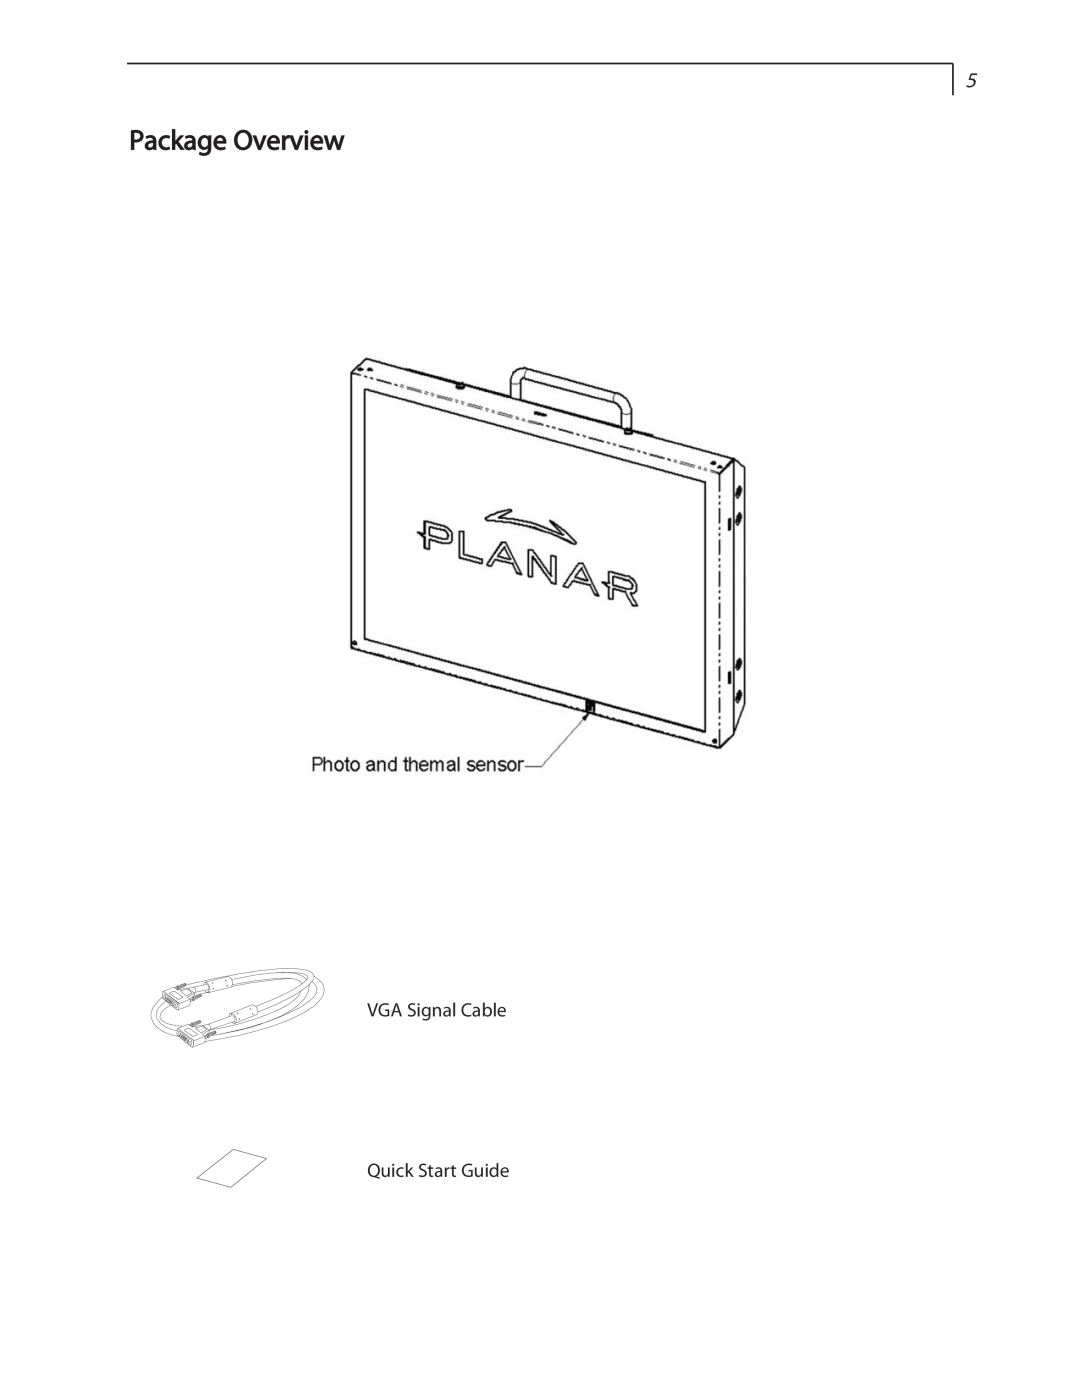 Planar LC1502R user manual Package Overview, VGA Signal Cable Quick Start Guide 